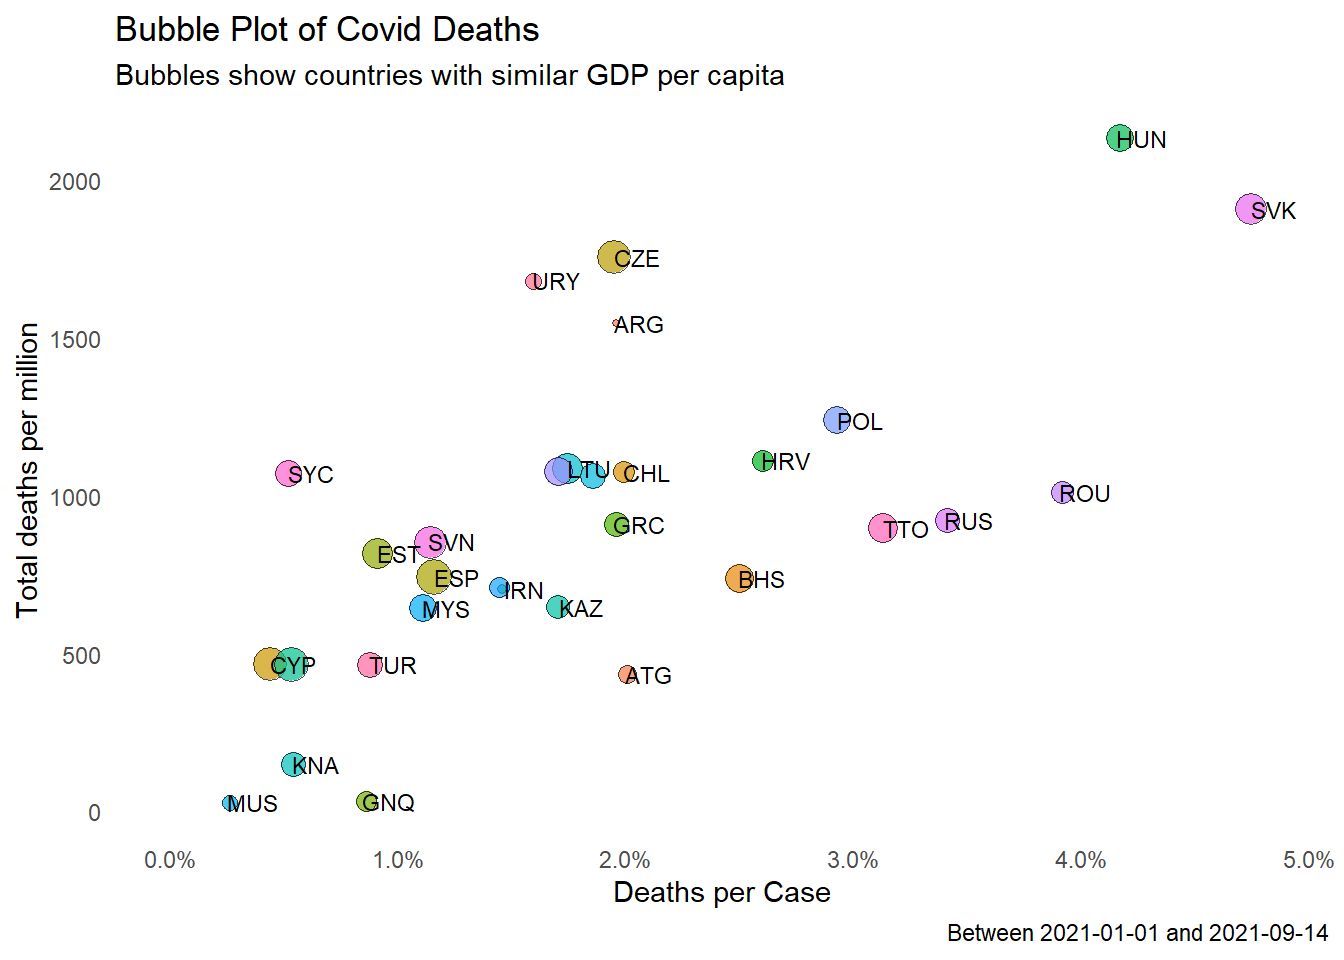 Bubble plot of selected Covid metrics for countries with similar GDP per capita